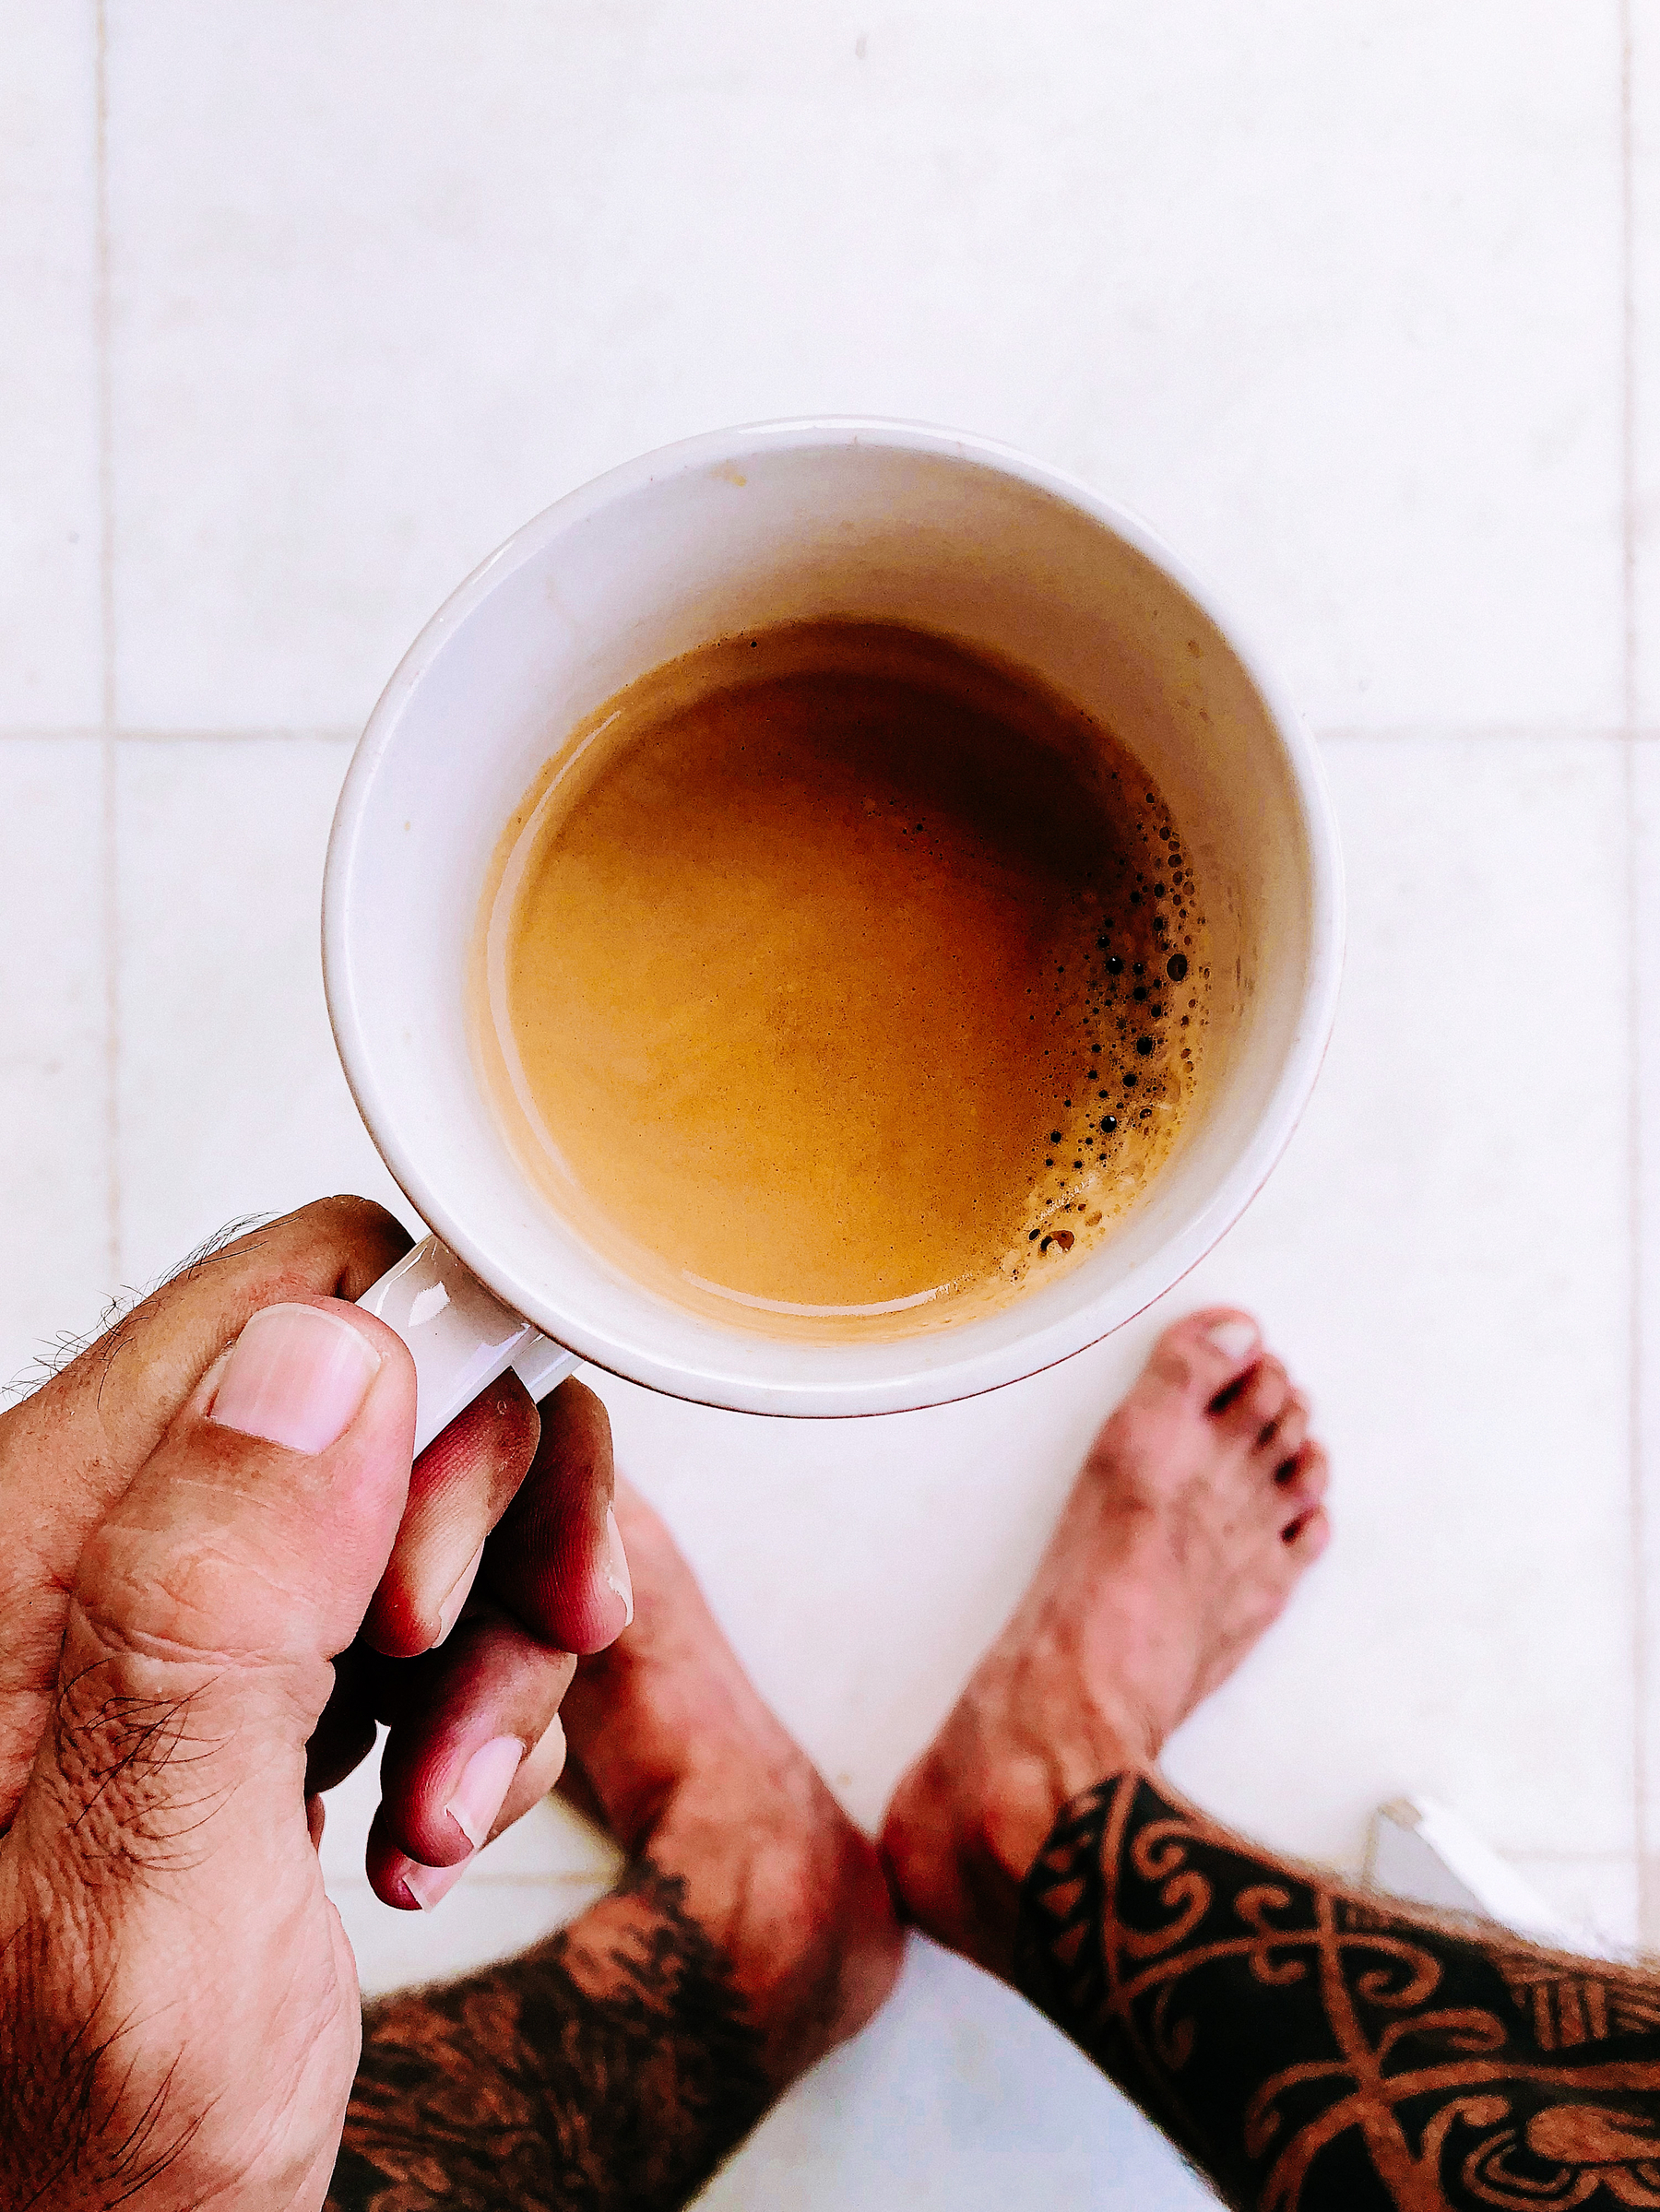 looking down on a hand holding a cup of coffee. We can also see tattooed legs.